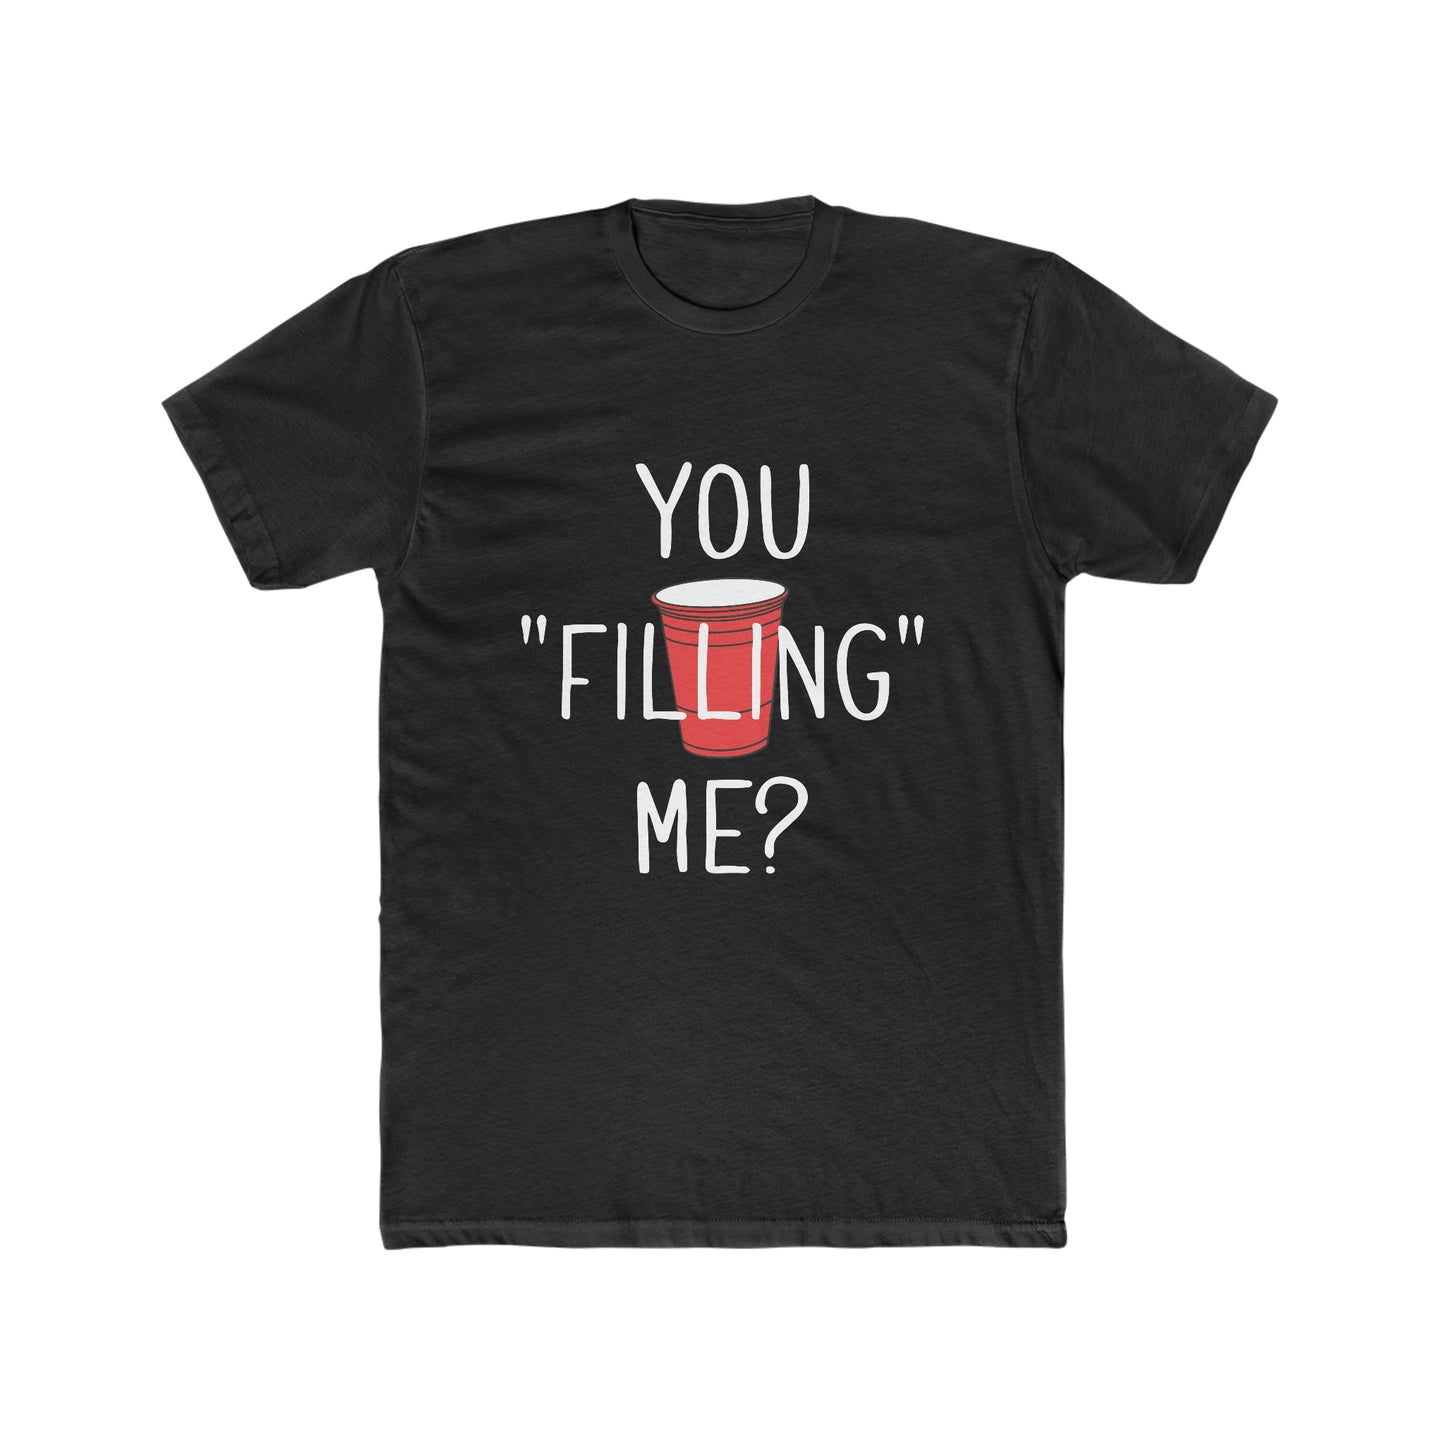 You Filling Me? Blk Short Sleeve Tee